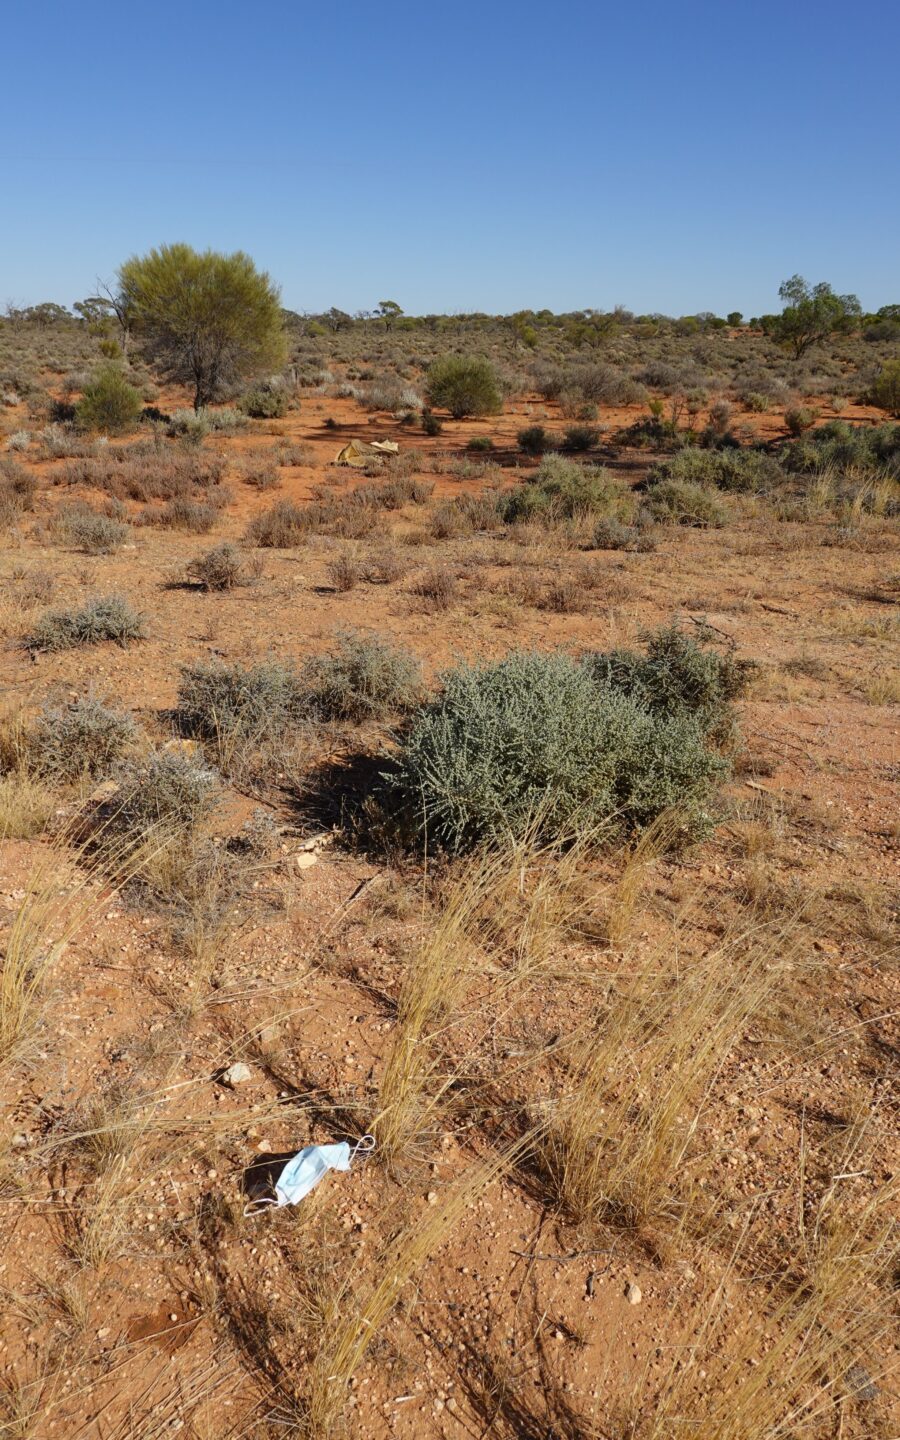 A blue surgical mask on the ground in outback Australia.